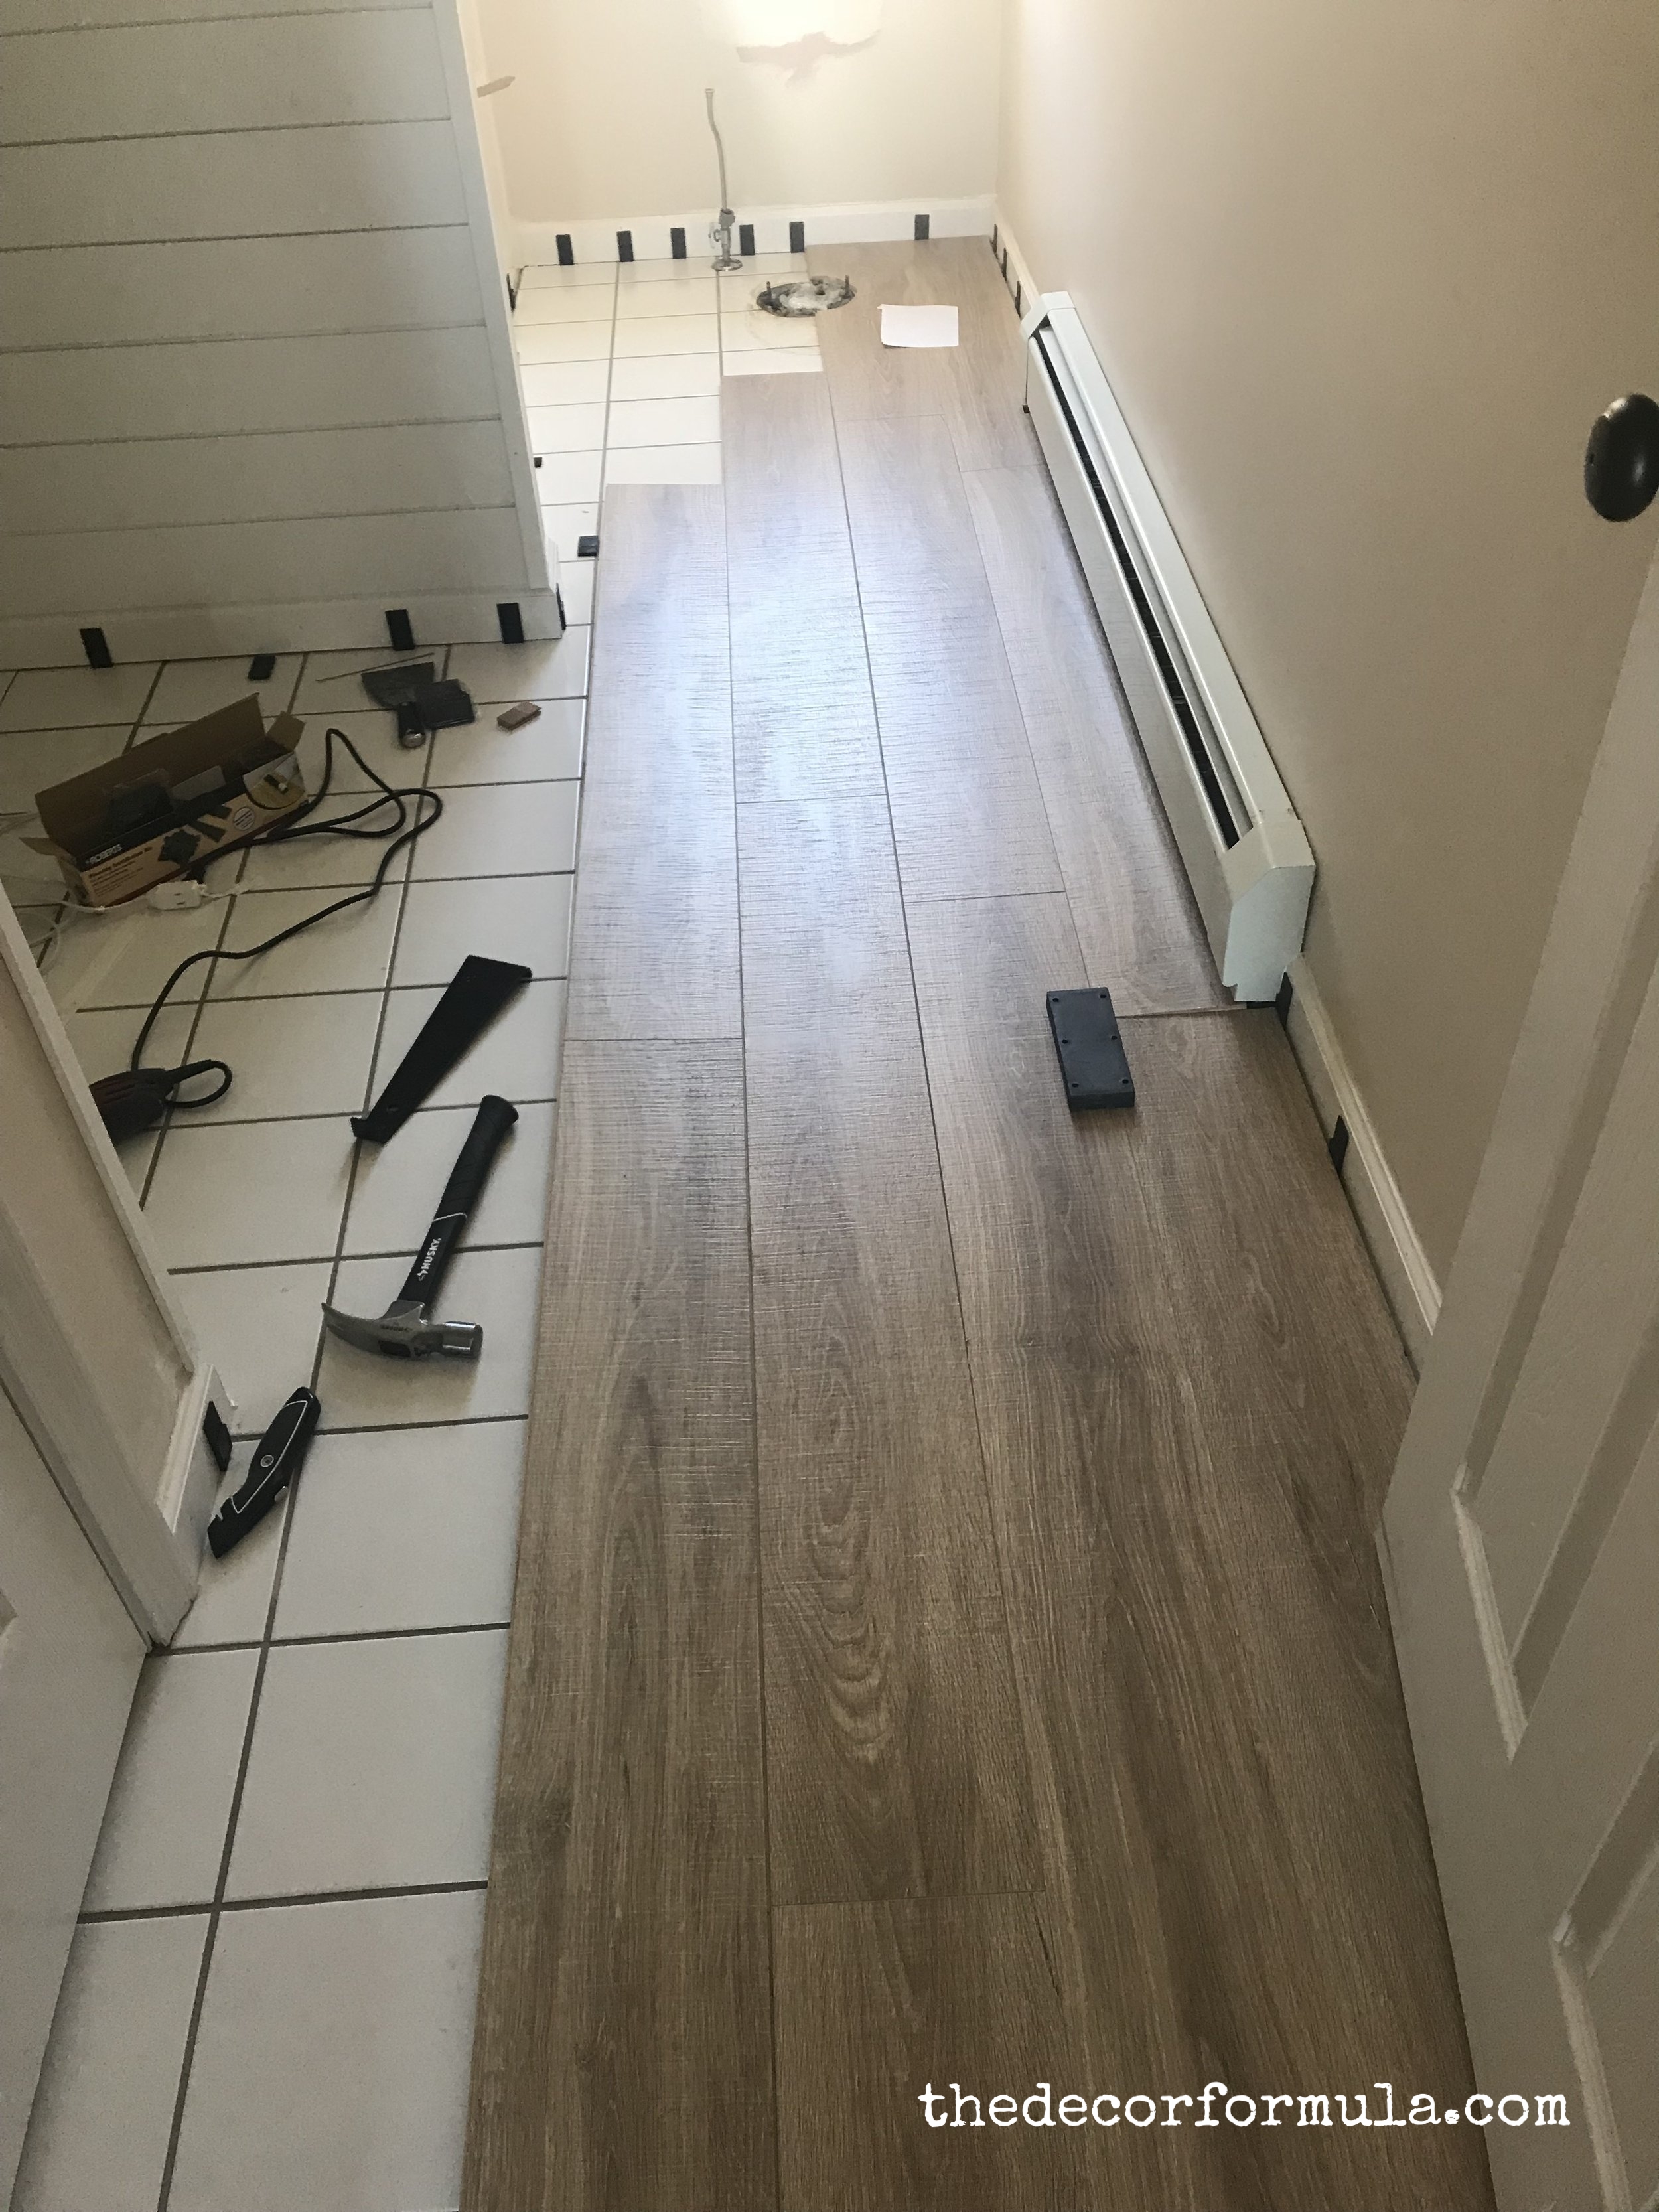 Ideas For Covering Up Tile Floors, Can You Change The Color Of Existing Floor Tile